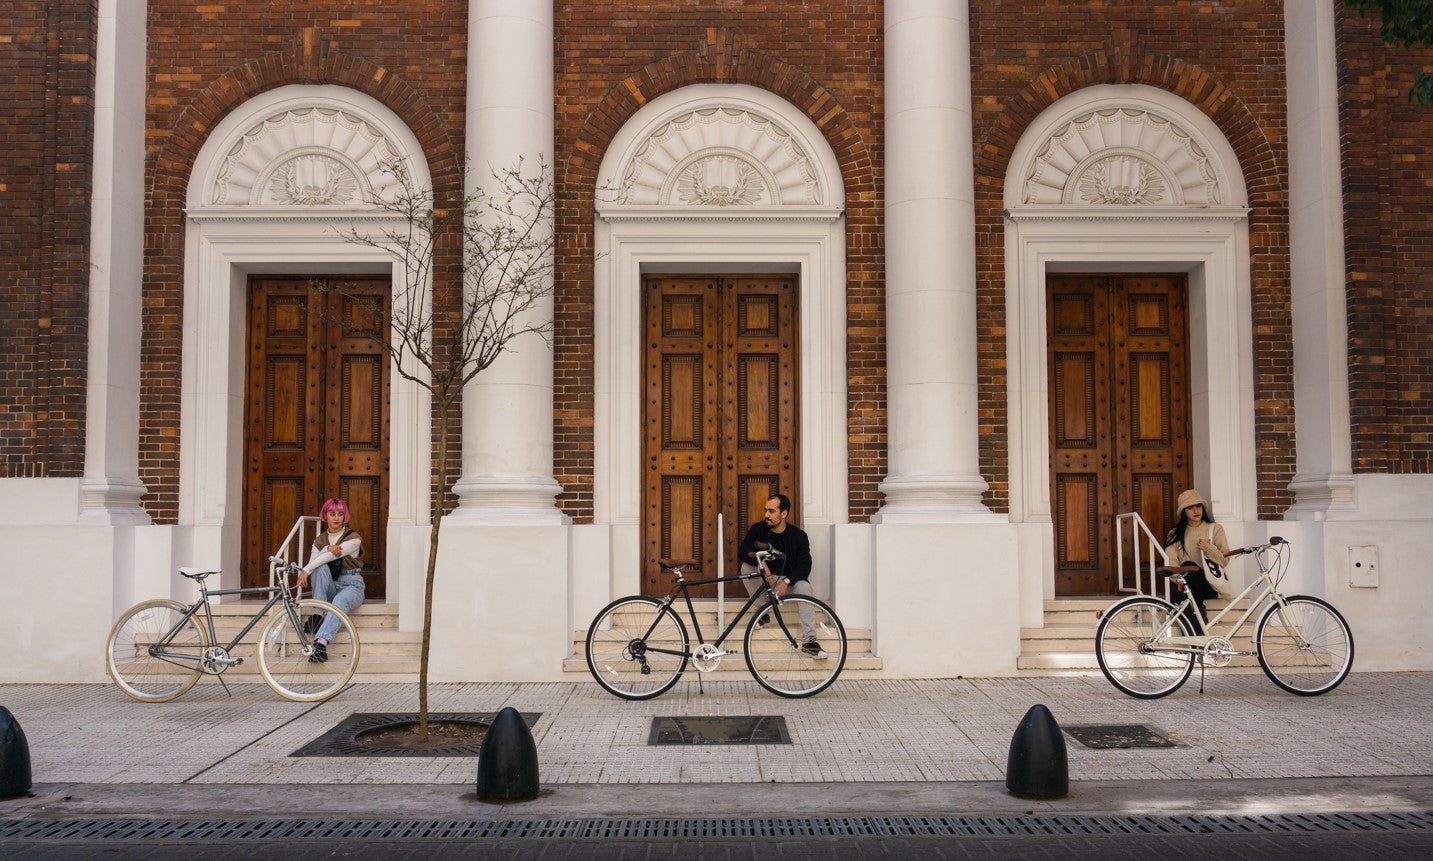 Three people with their bicycles in front of large wooden doors